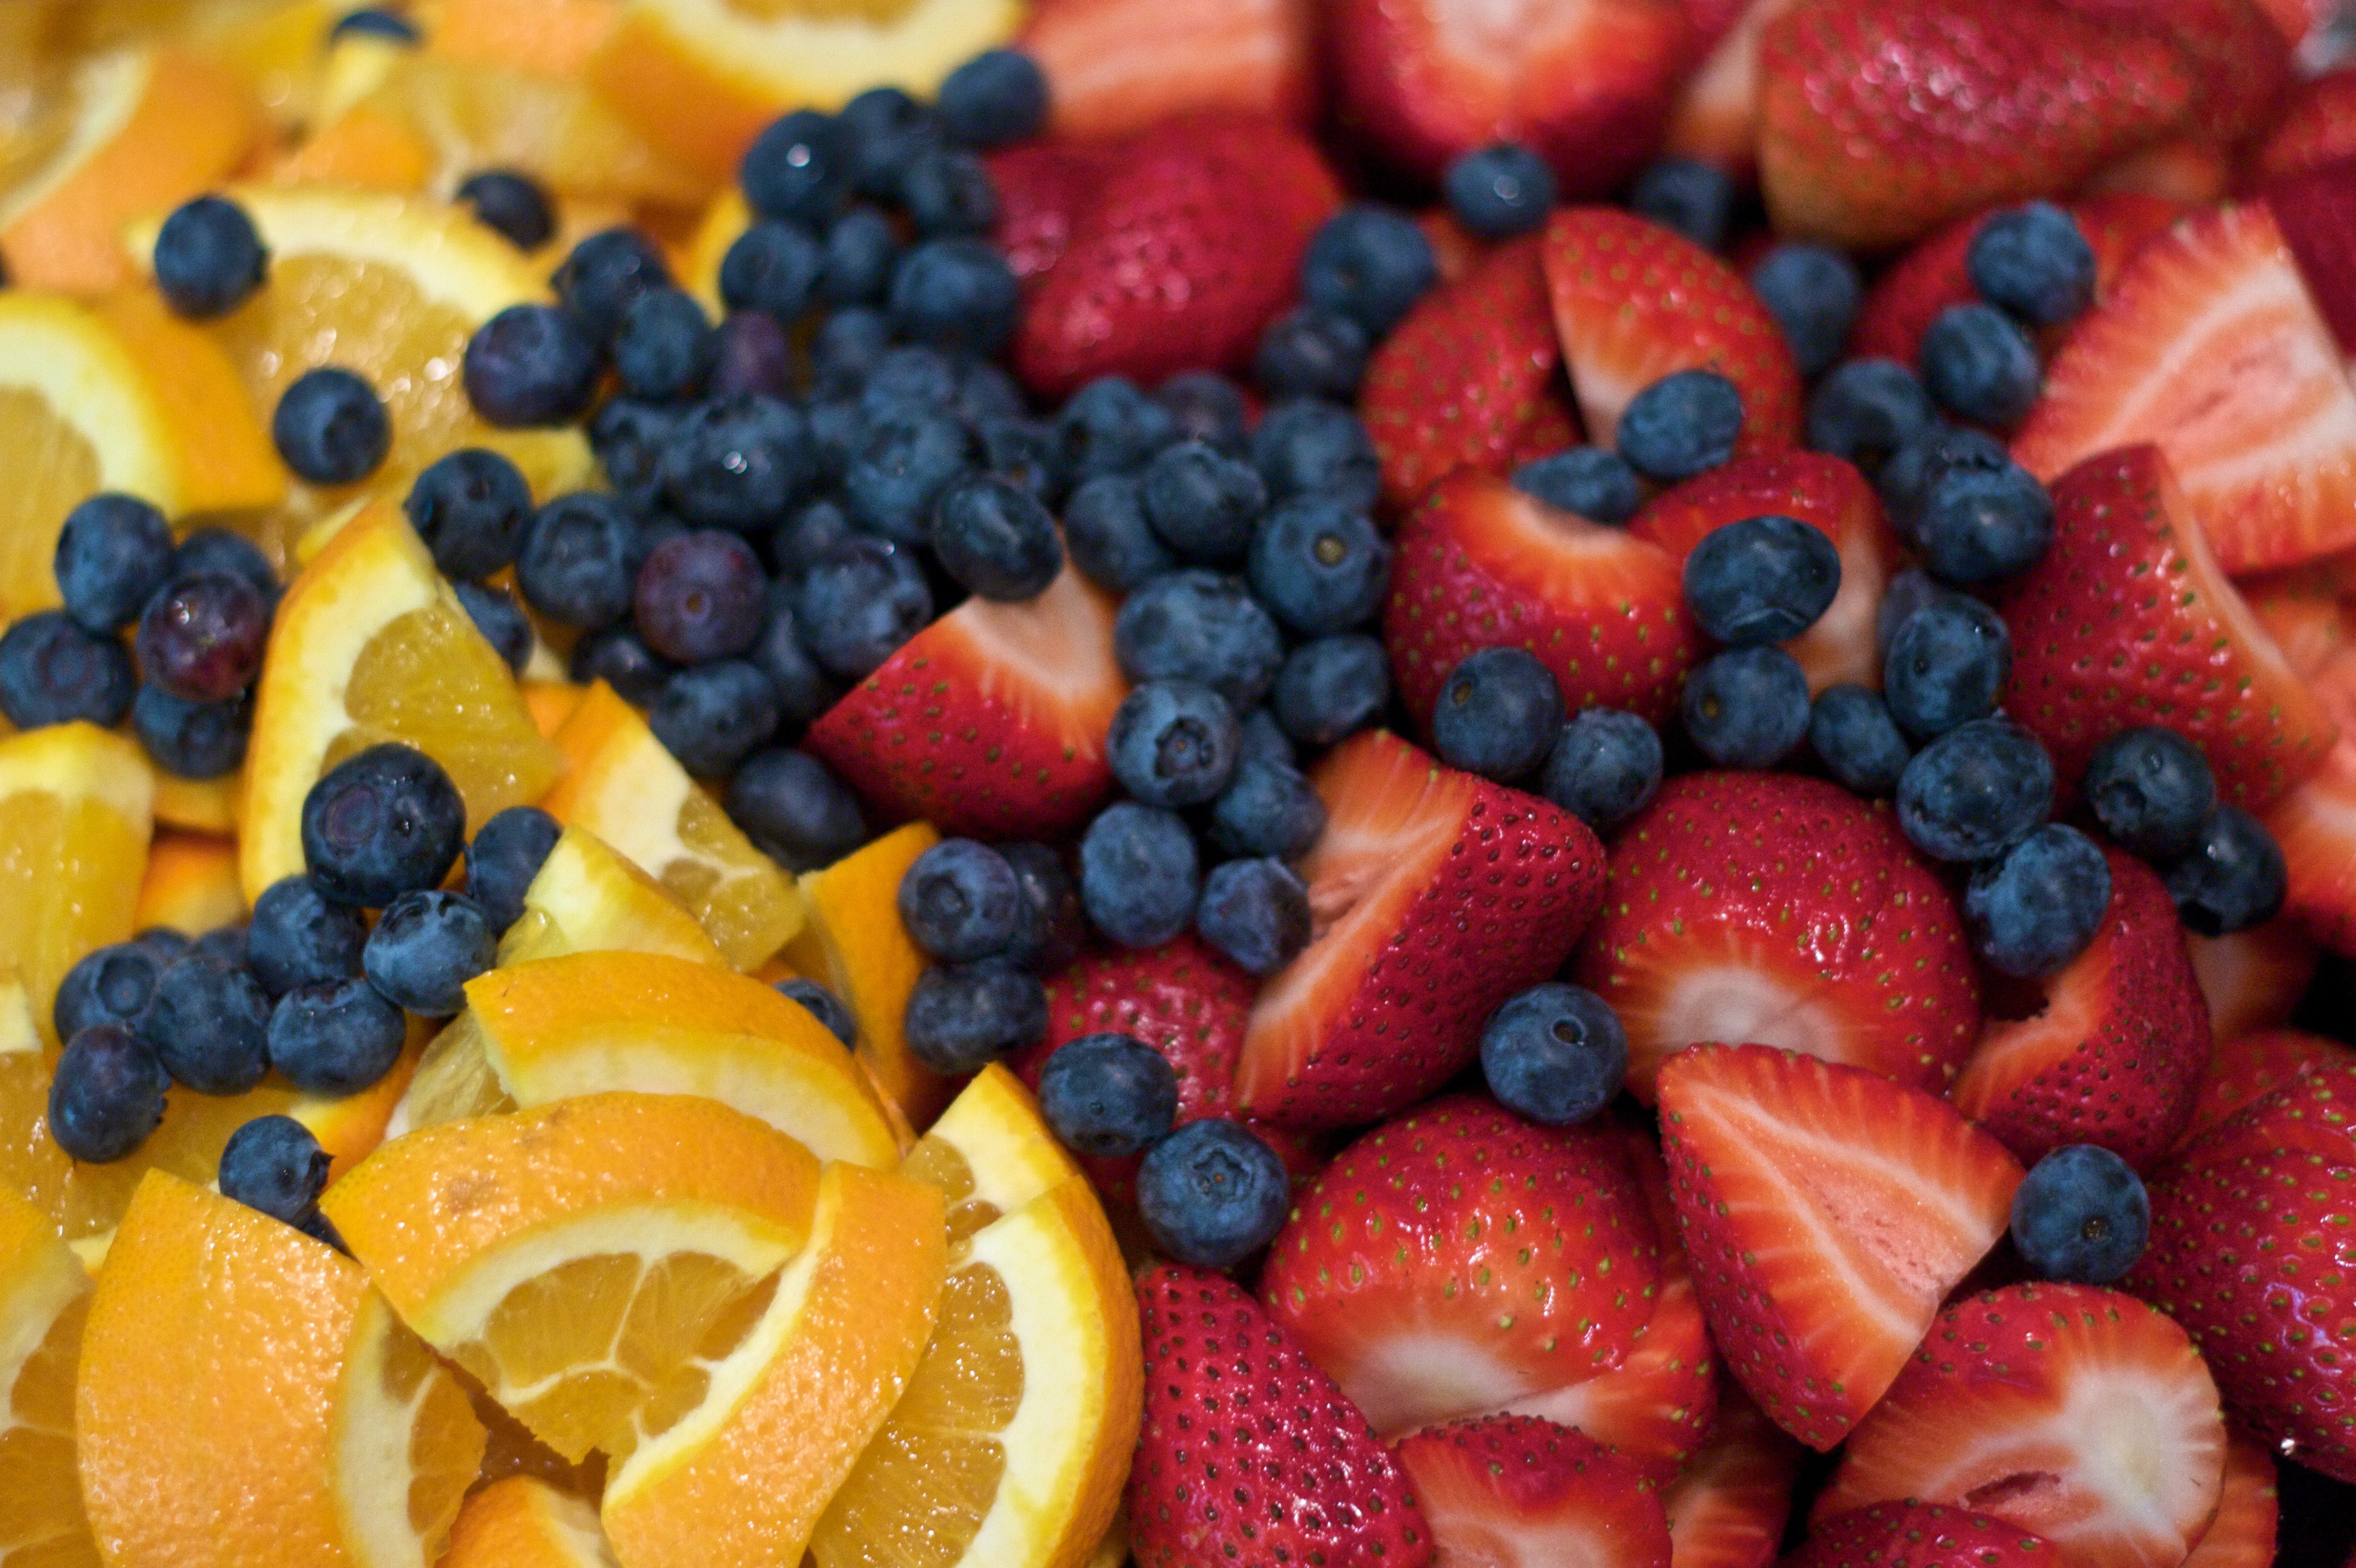 An image of sliced oranges, blueberries, and sliced strawberries.